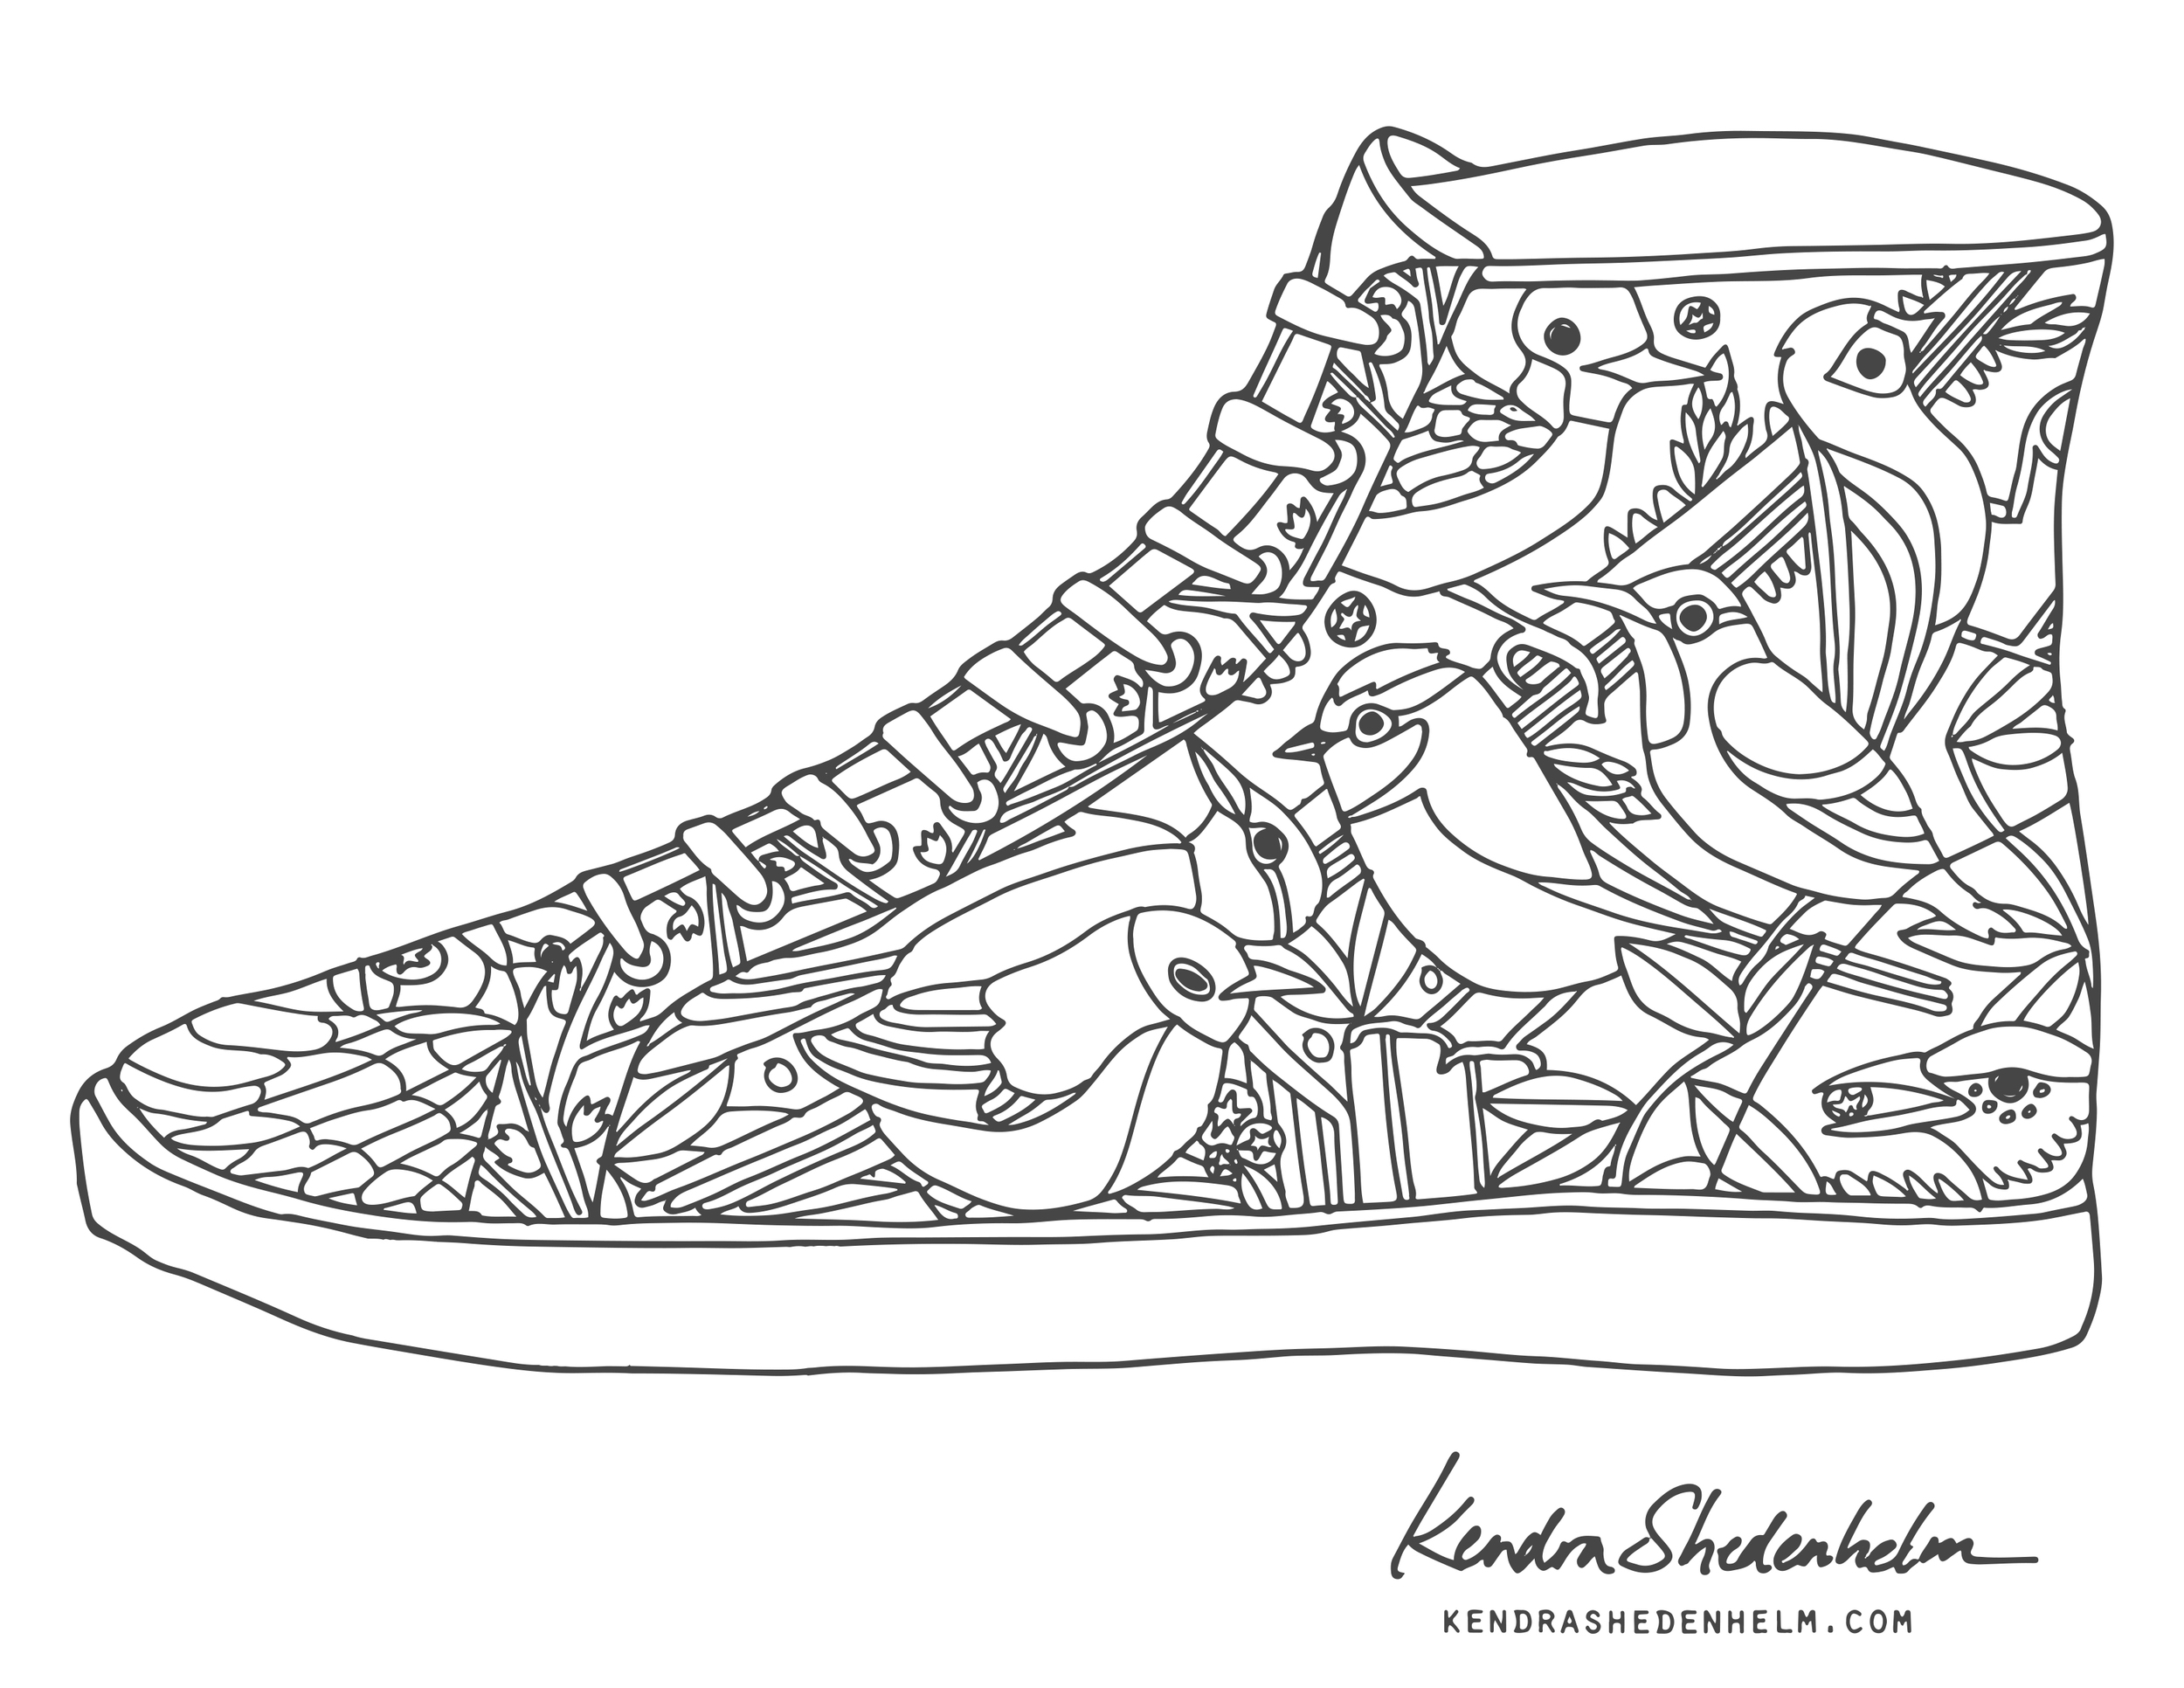 Birds doodles shoes and free coloring pages â kendra shedenhelm